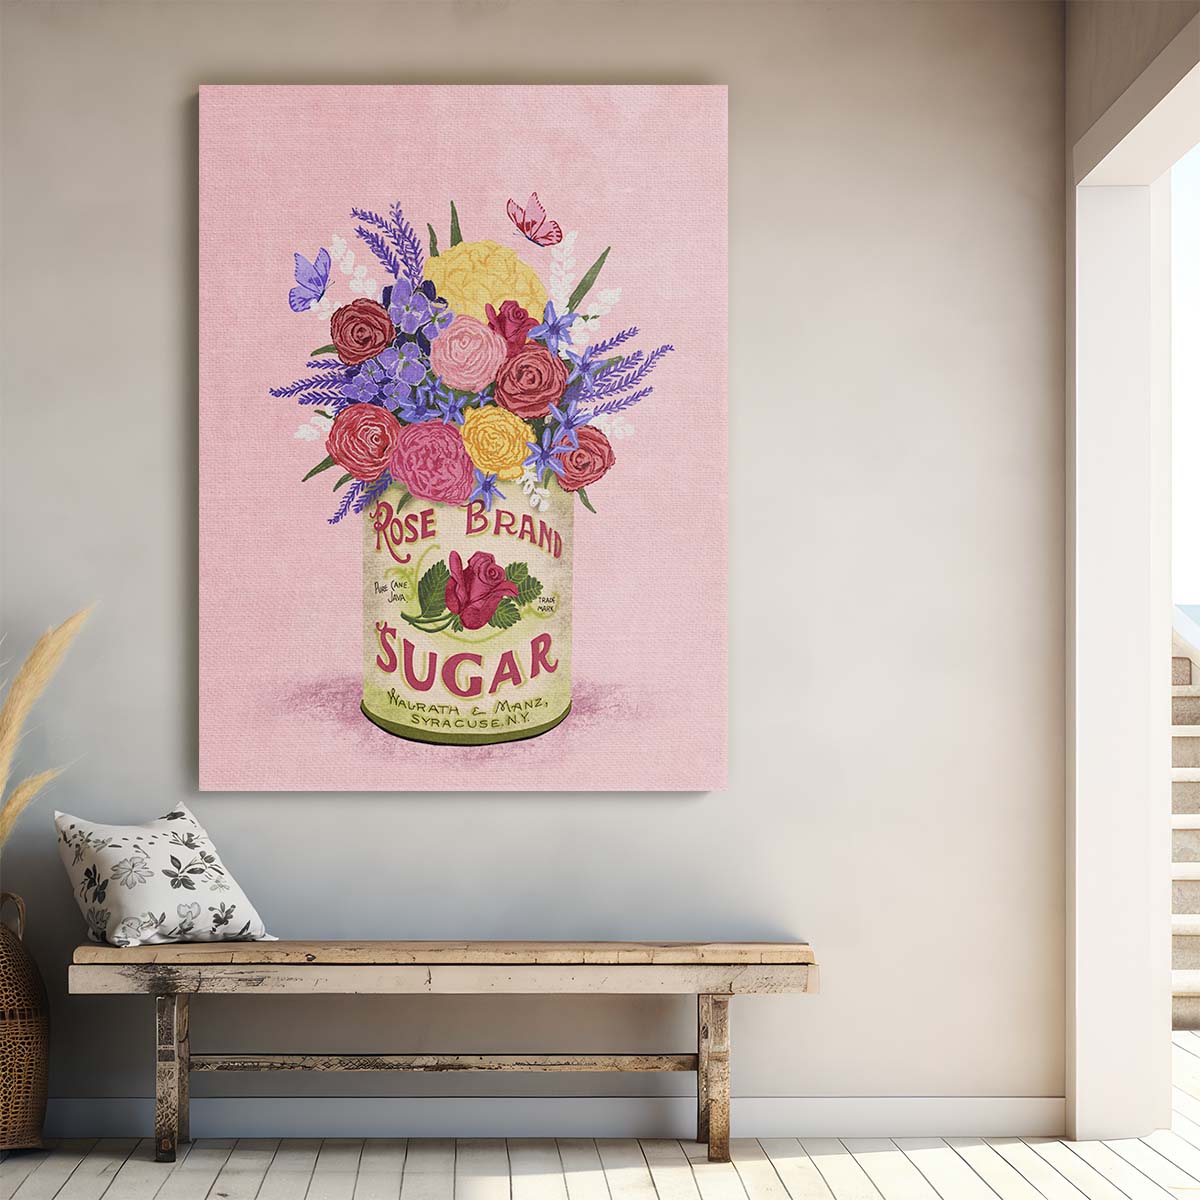 Vintage Botanical Illustration Roses & Butterflies in Retro Can Art by Luxuriance Designs, made in USA